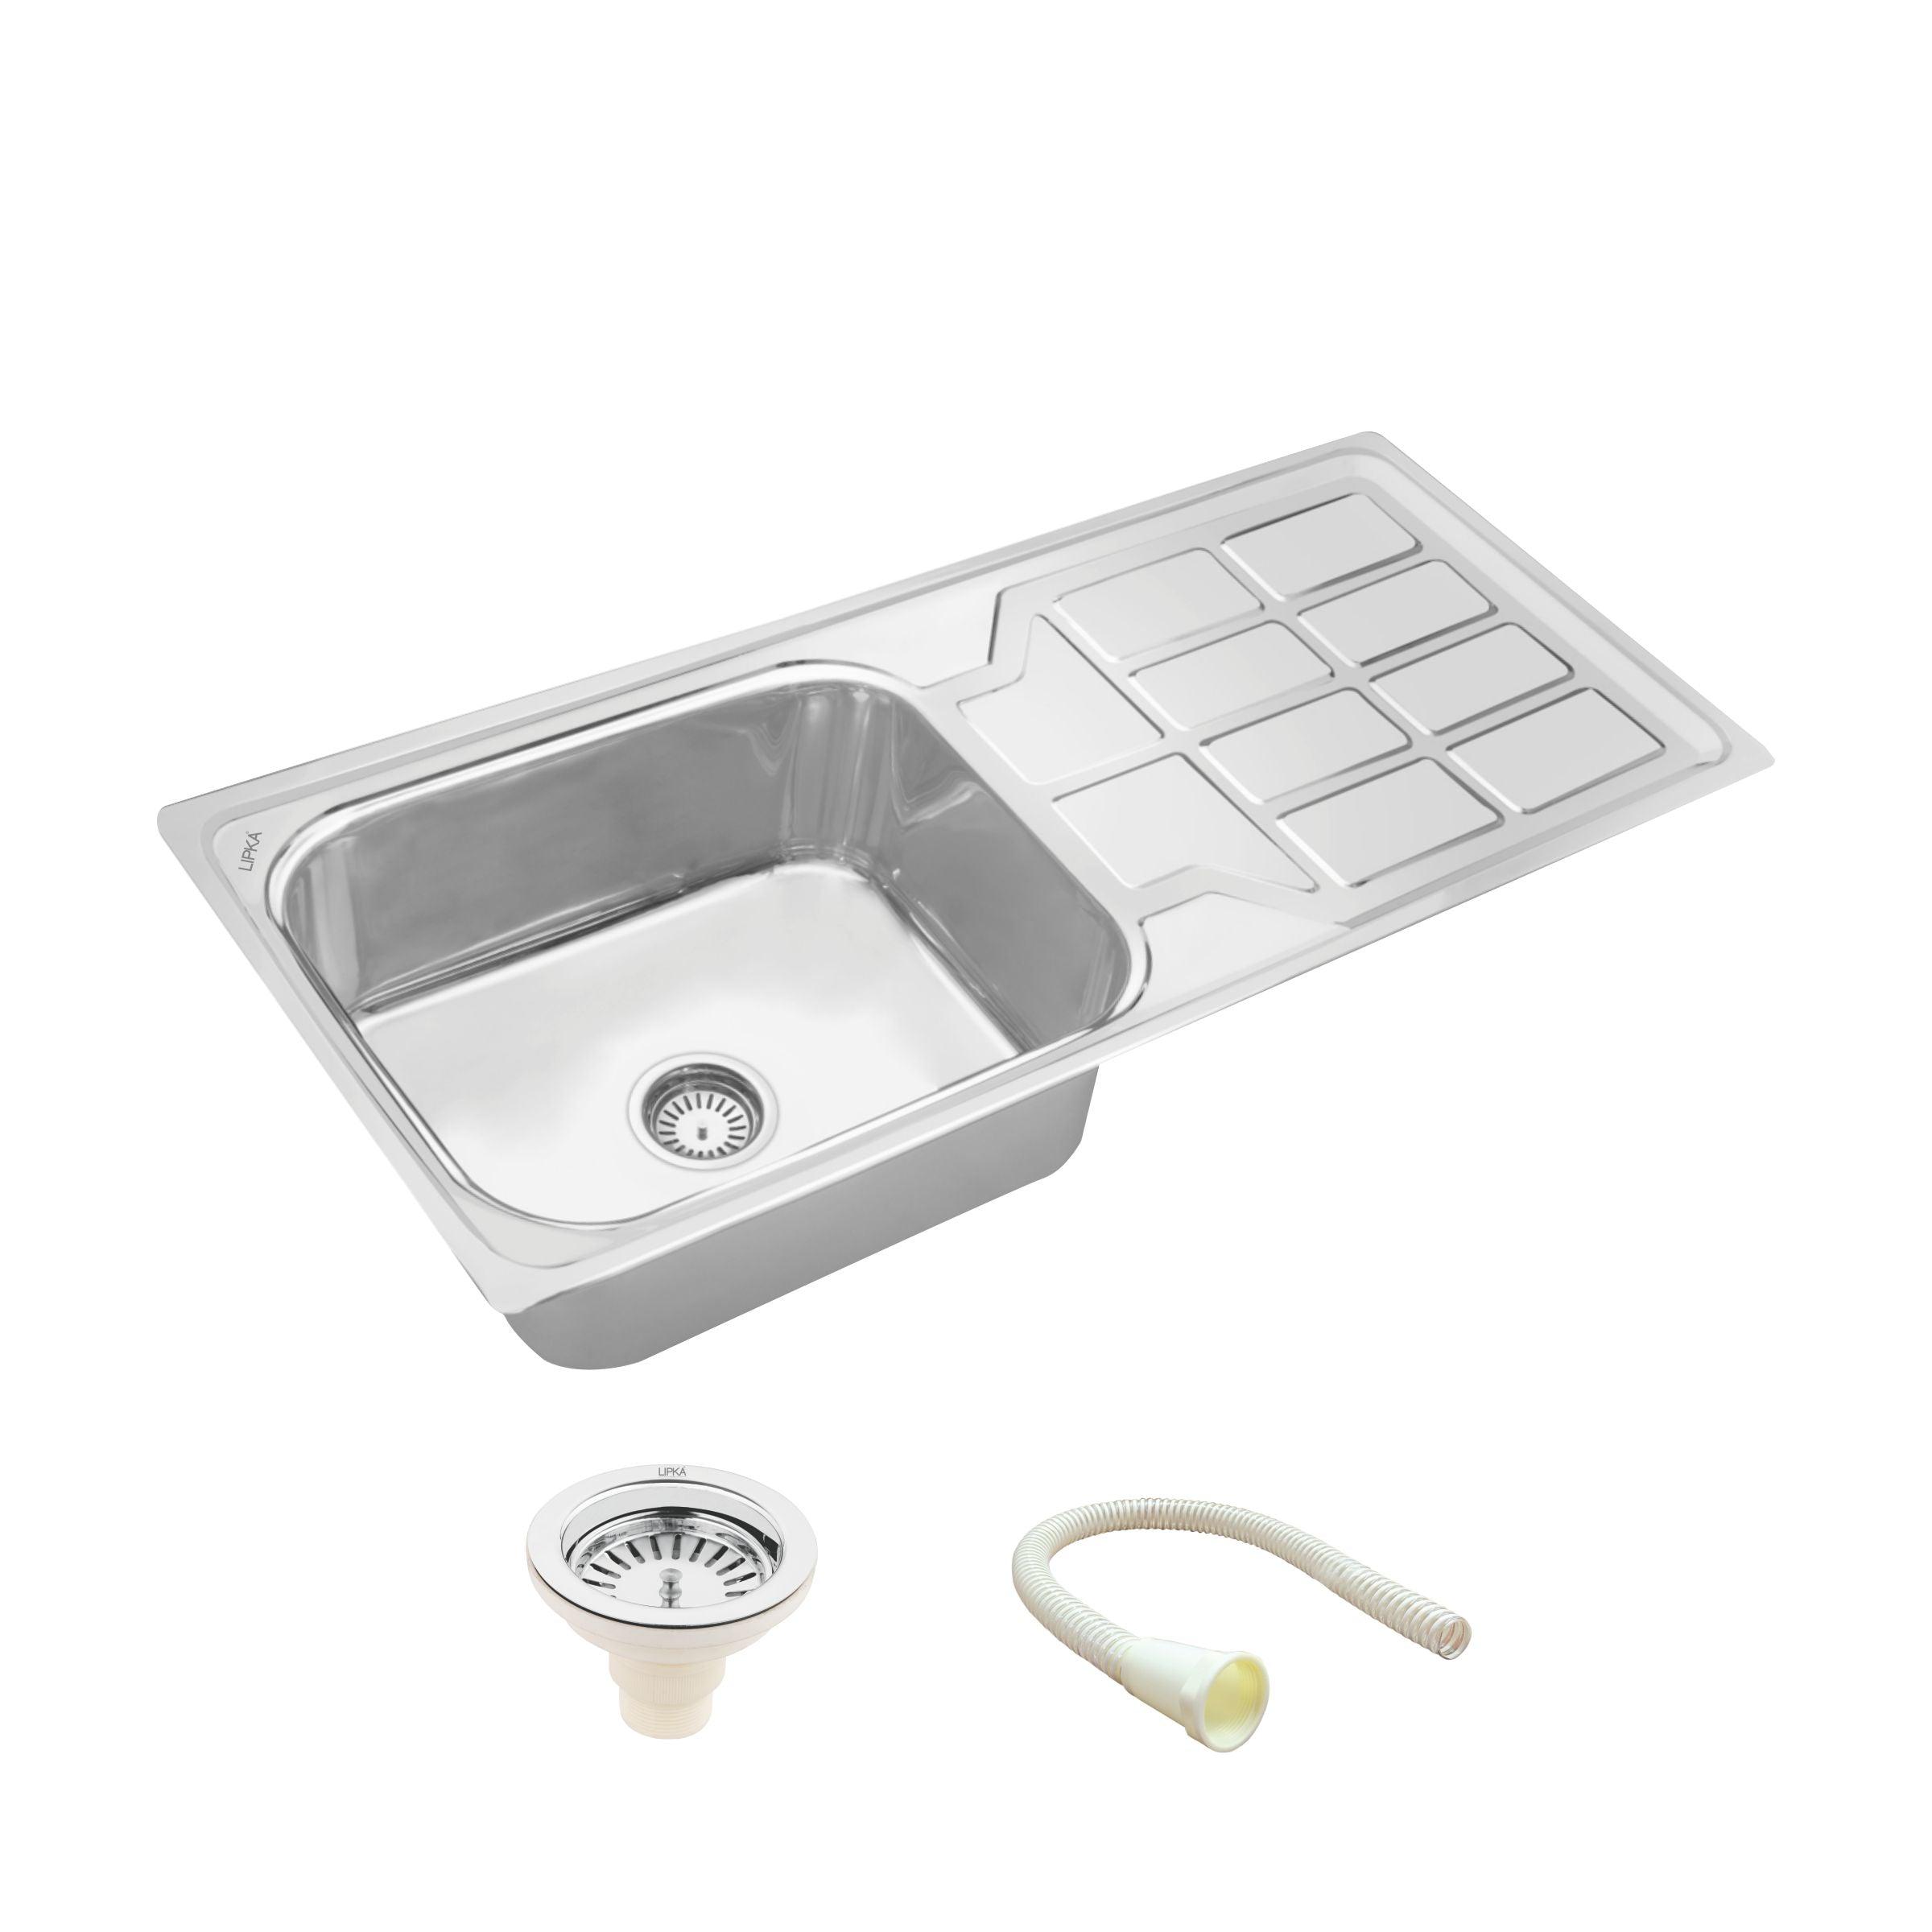 Square Single Bowl Kitchen Sink with Drainboard (45 x 20 x 9 Inches) - LIPKA - Lipka Home